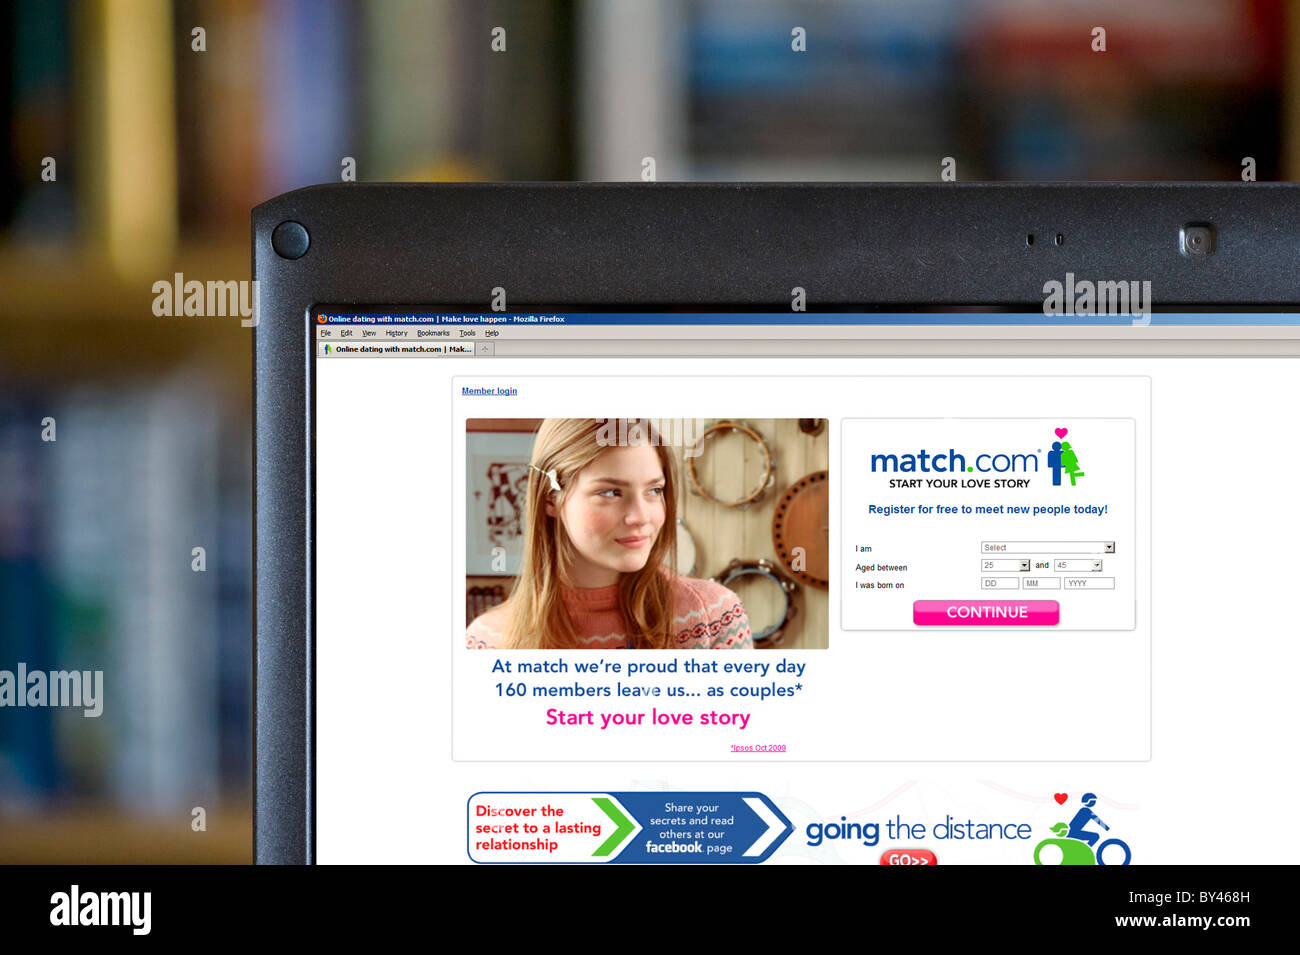 Online dating with match.com, UK Stock Photo